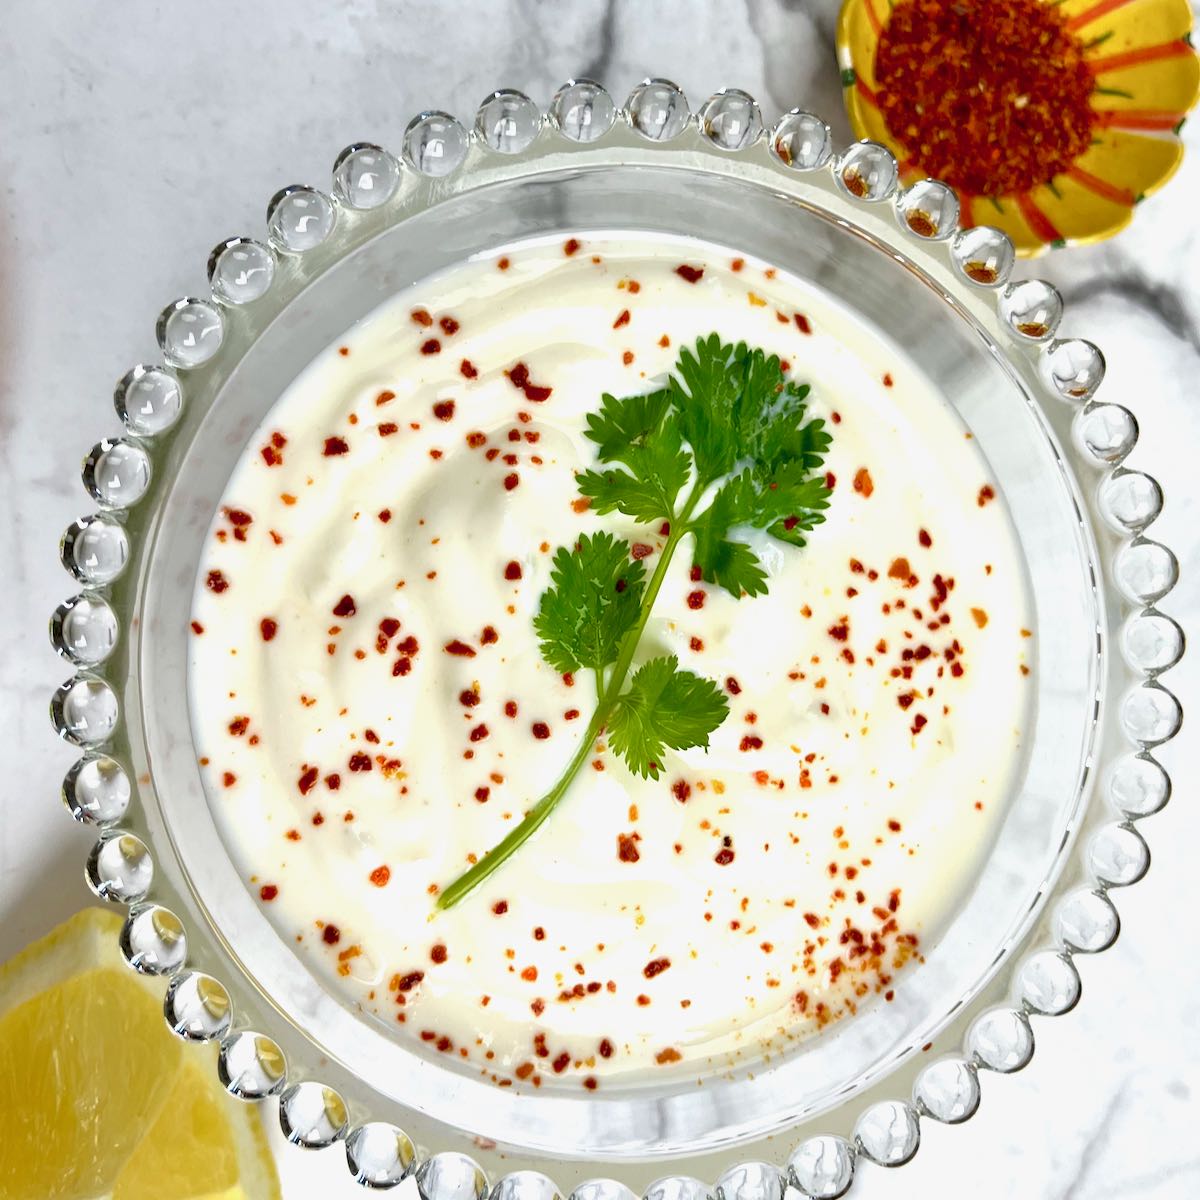 Raita for Biryani & Pulao garnished with a frilly bunch of cilantro and accompanied by sliced shallot.